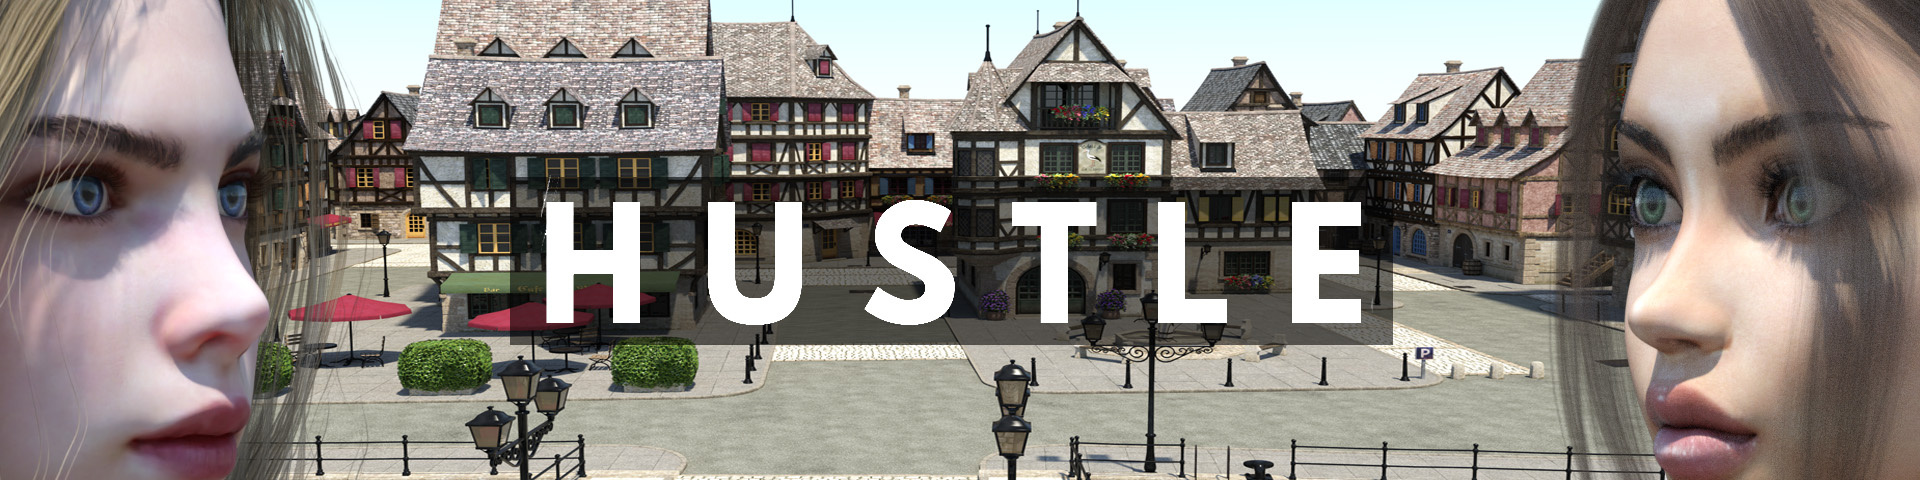 Hustle Town Version 0.3 by Mickydoo